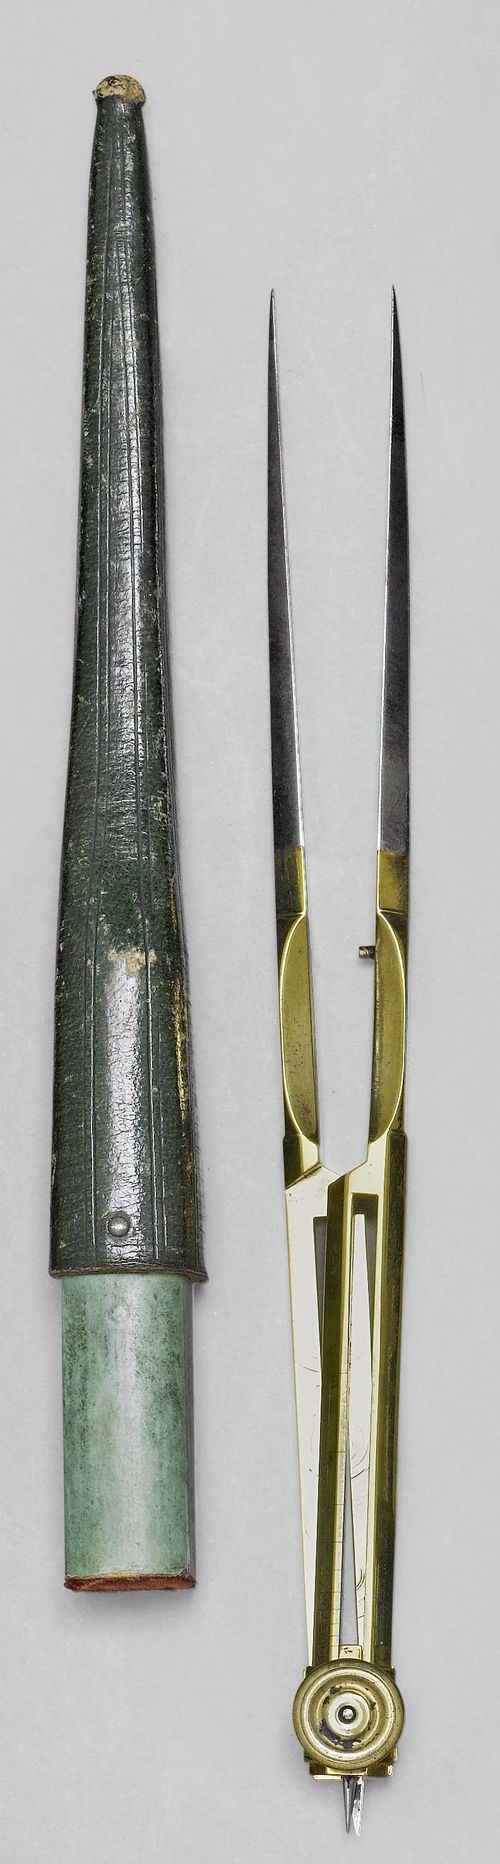 A BRASS AND STEEL PROPORTIONAL COMPASS IN GREEN LEATHER CASE, France, 19th c. L legs 20.5 cm.